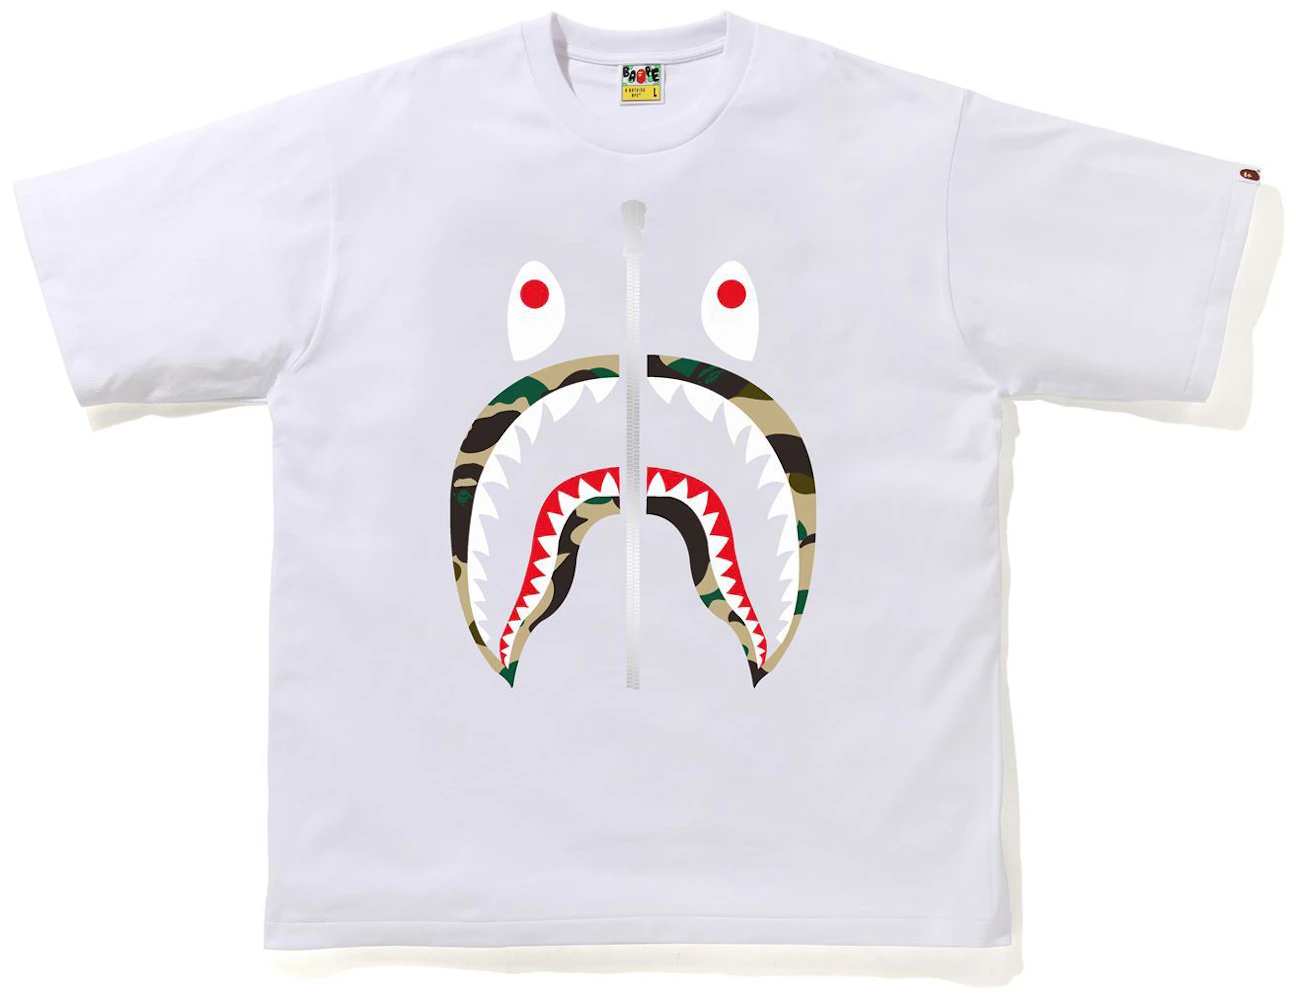 BAPE 1st Camo Shark Relaxed Fit Tee White/Yellow Men's - SS21 - US